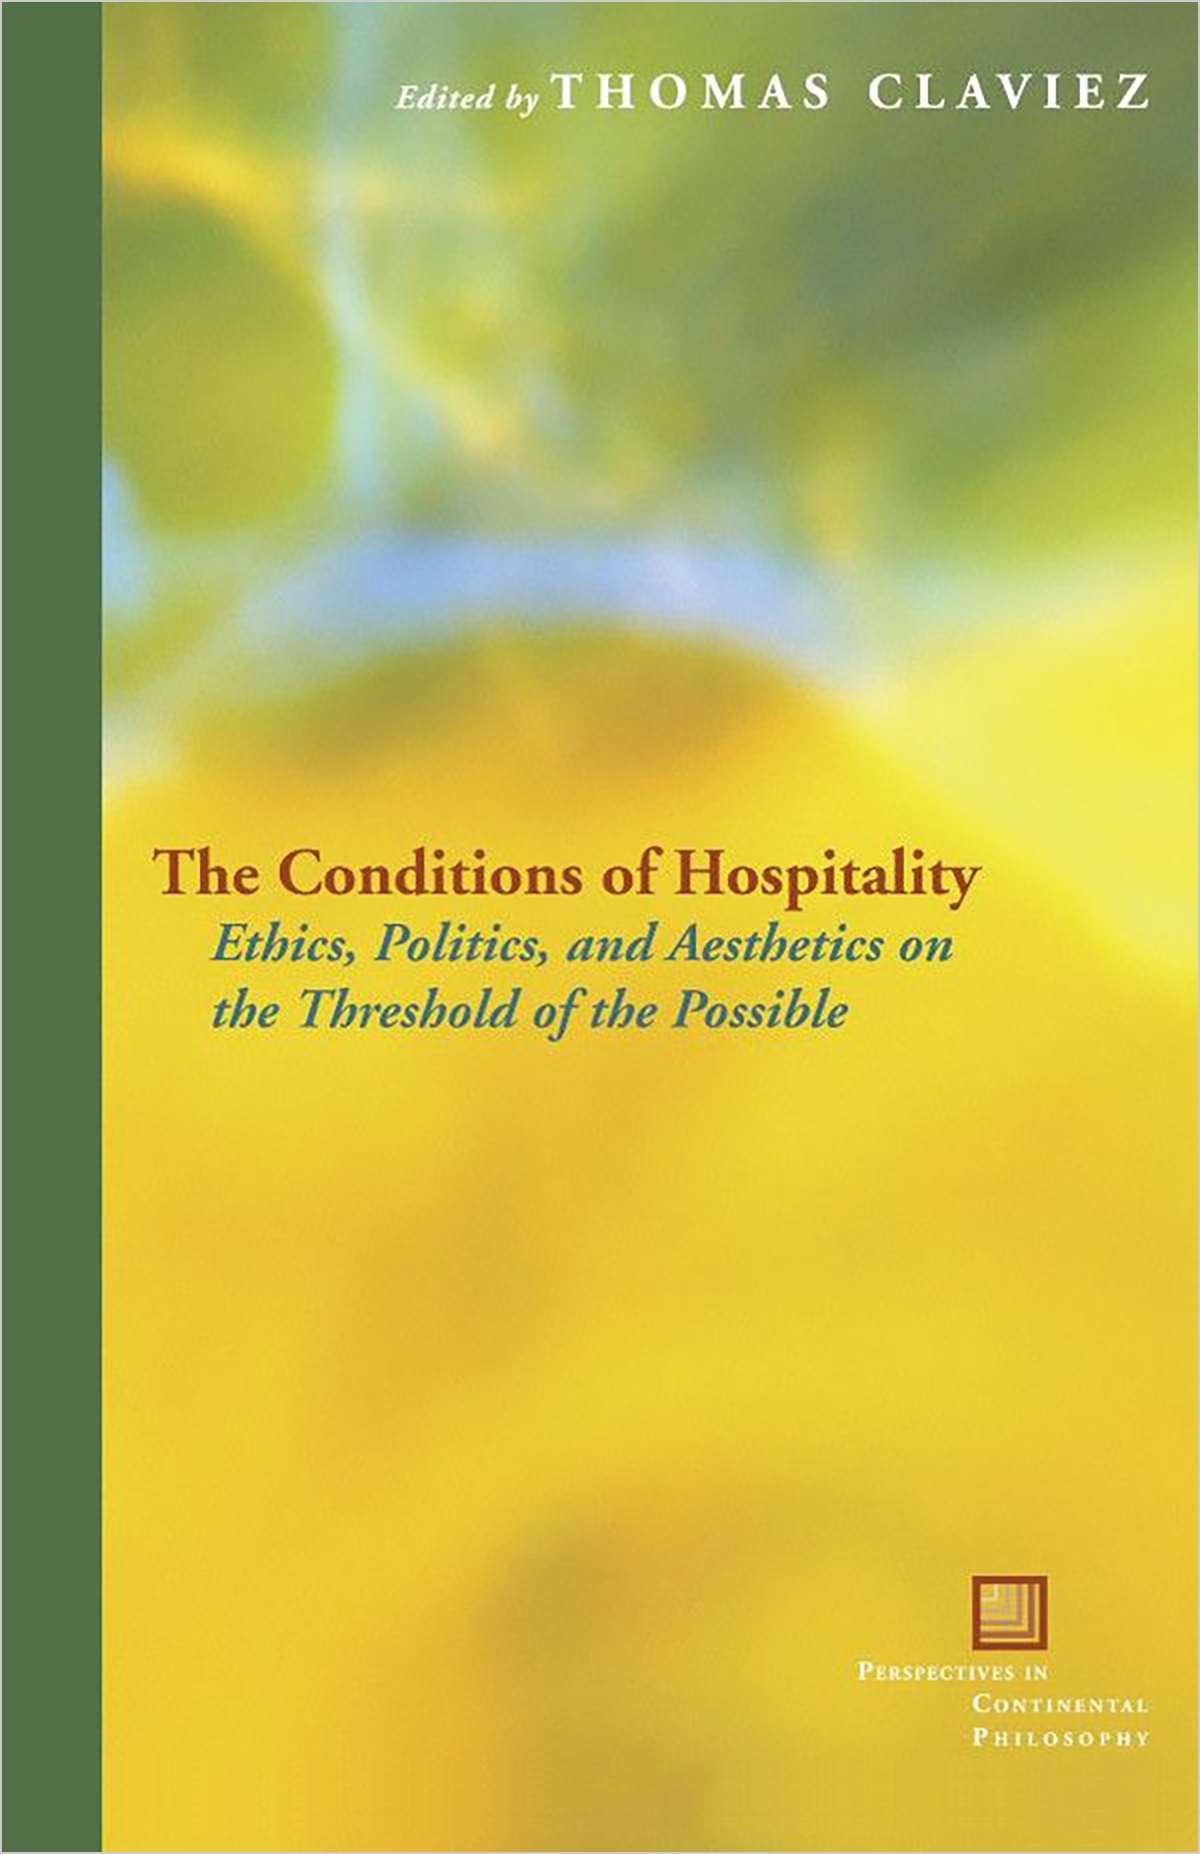 The Conditions of Hospitality: Ethics, Politics and Aesthetics on the Threshold of the Possible. New York: Fordham UP, 2013.